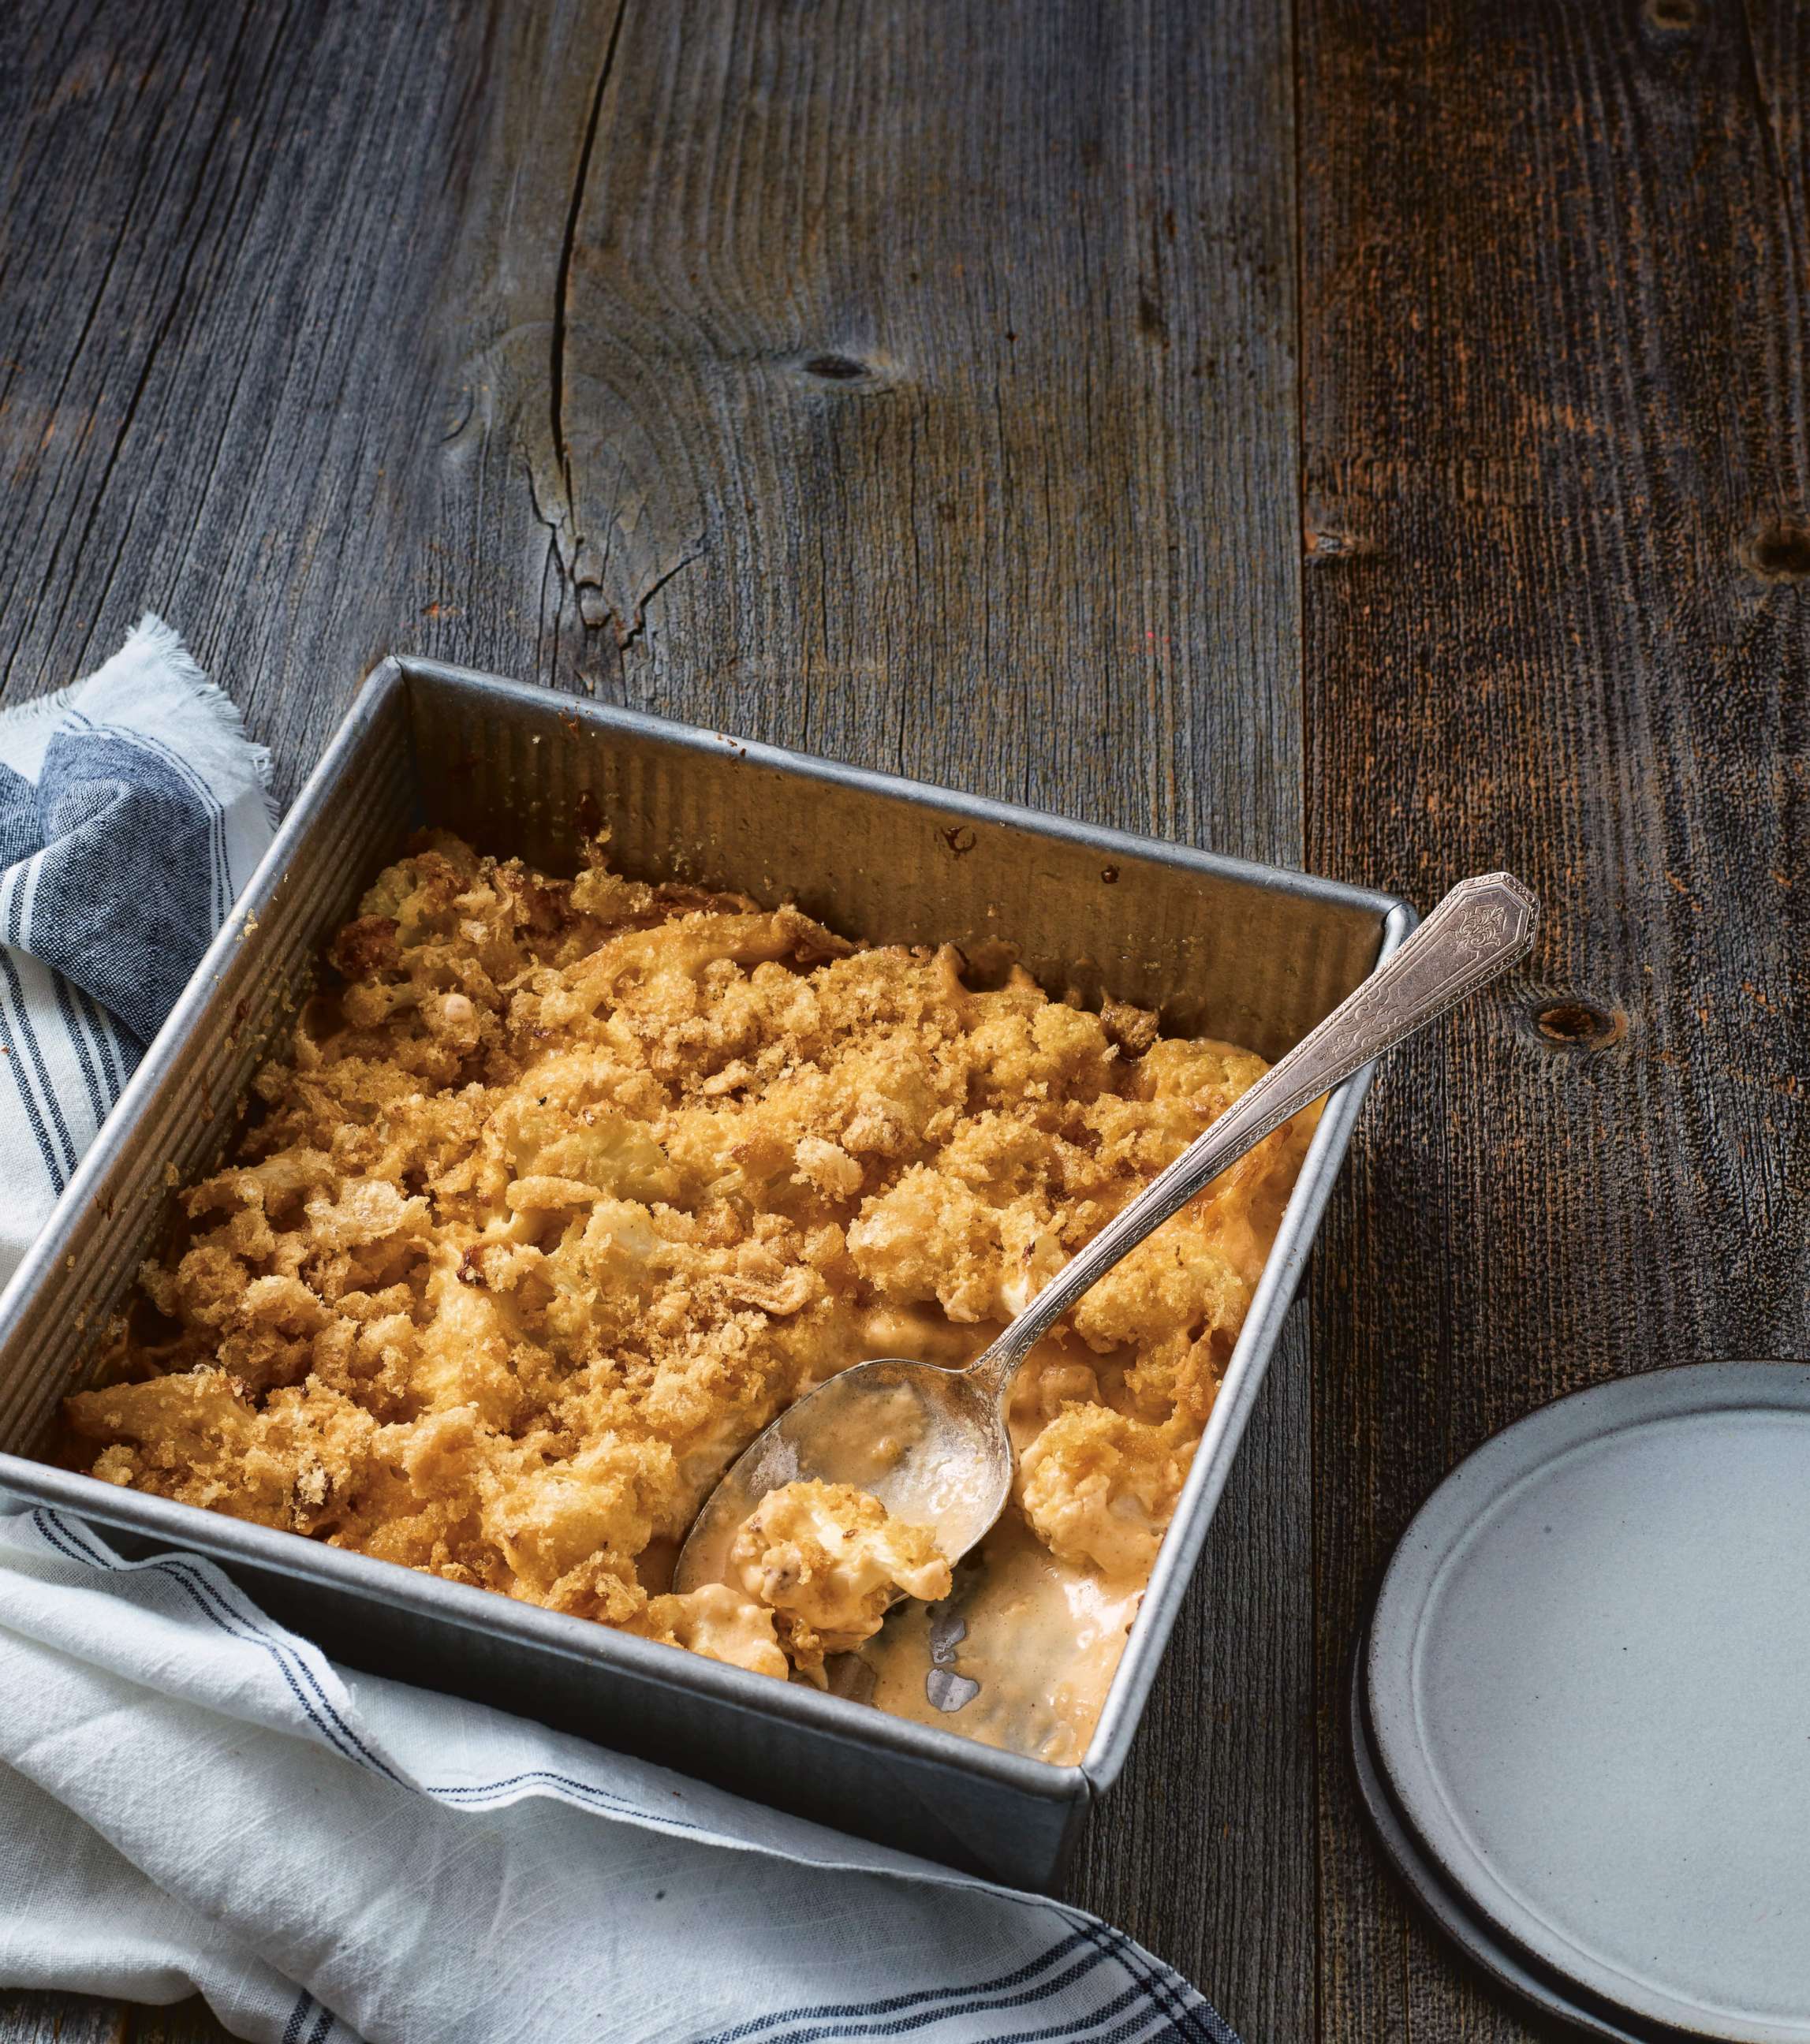 PHOTO: Chef Rocco DiSpirito's cauliflower "macaroni" and cheese is a nutrient rich, low-carb keto-friendly recipe.